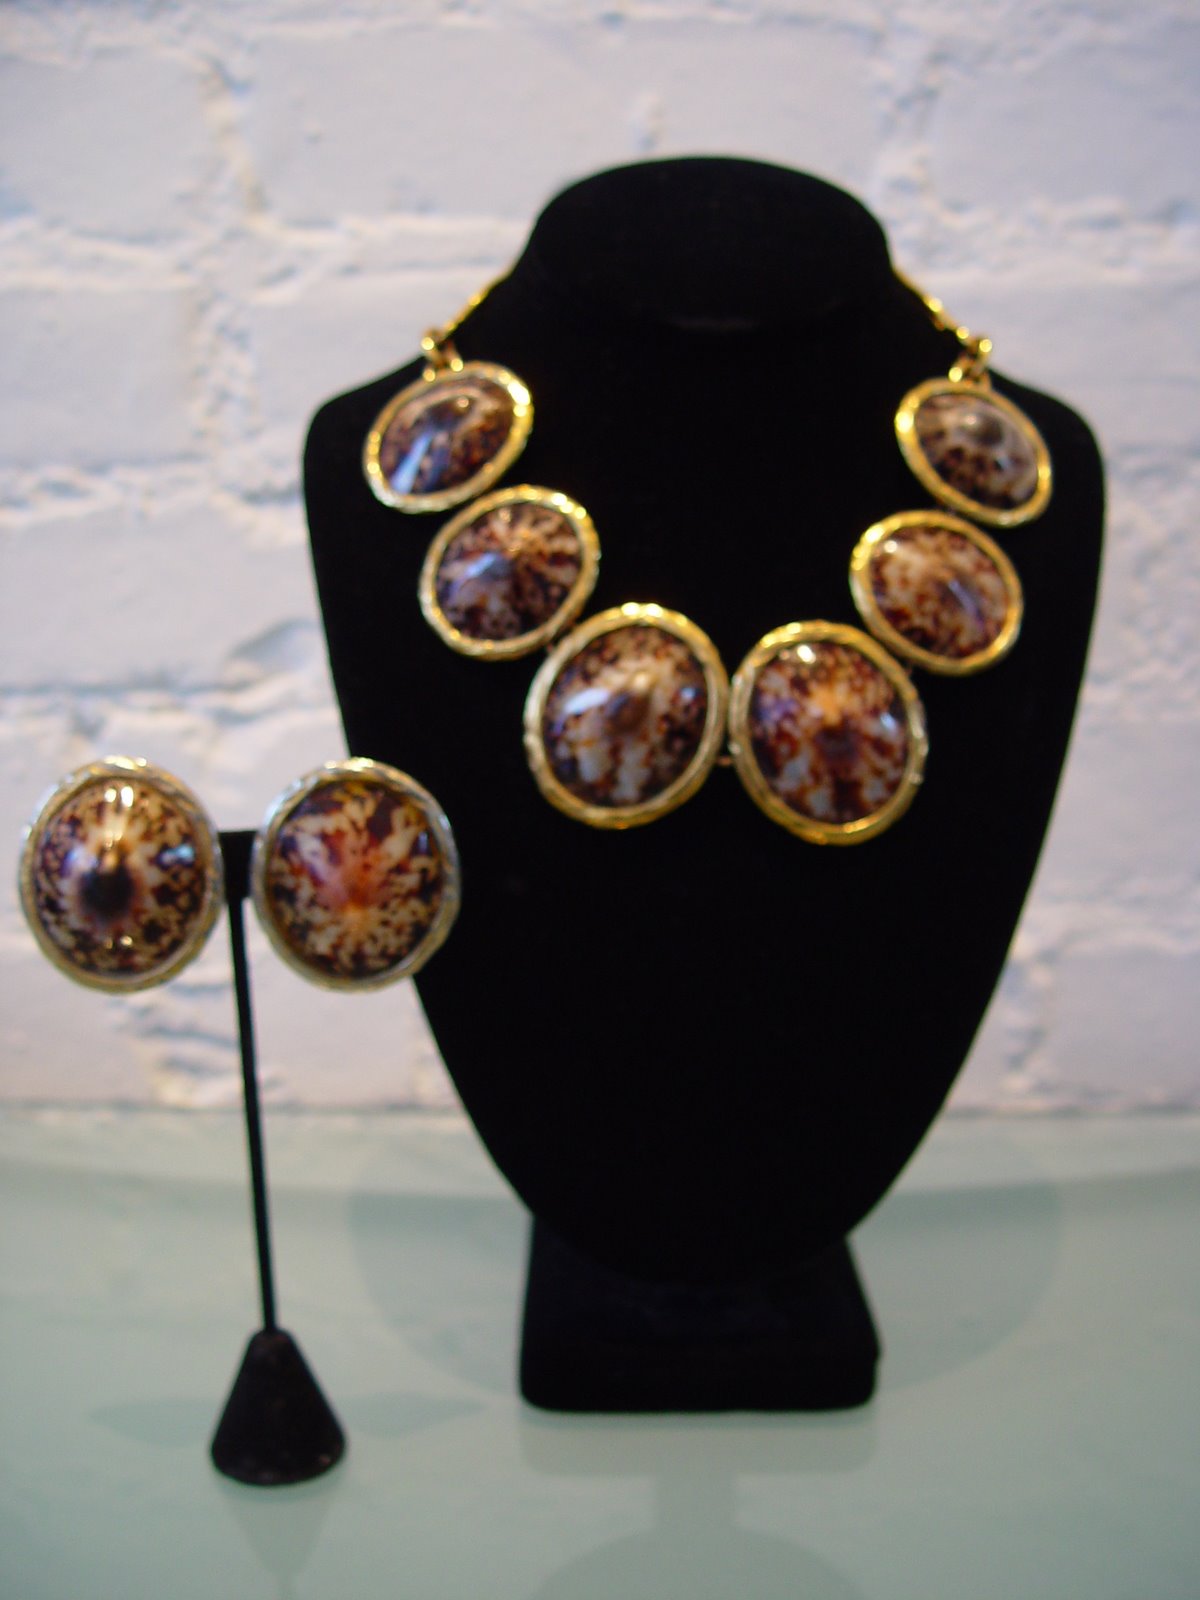 [YSL+RIVE+GAUCHE+NECKLACE+WITH+MATCHING+EARRINGS+SHELL+FRAMED+IN+GOLD+WITH+LINK+C+70S.JPG+(2).JPG]